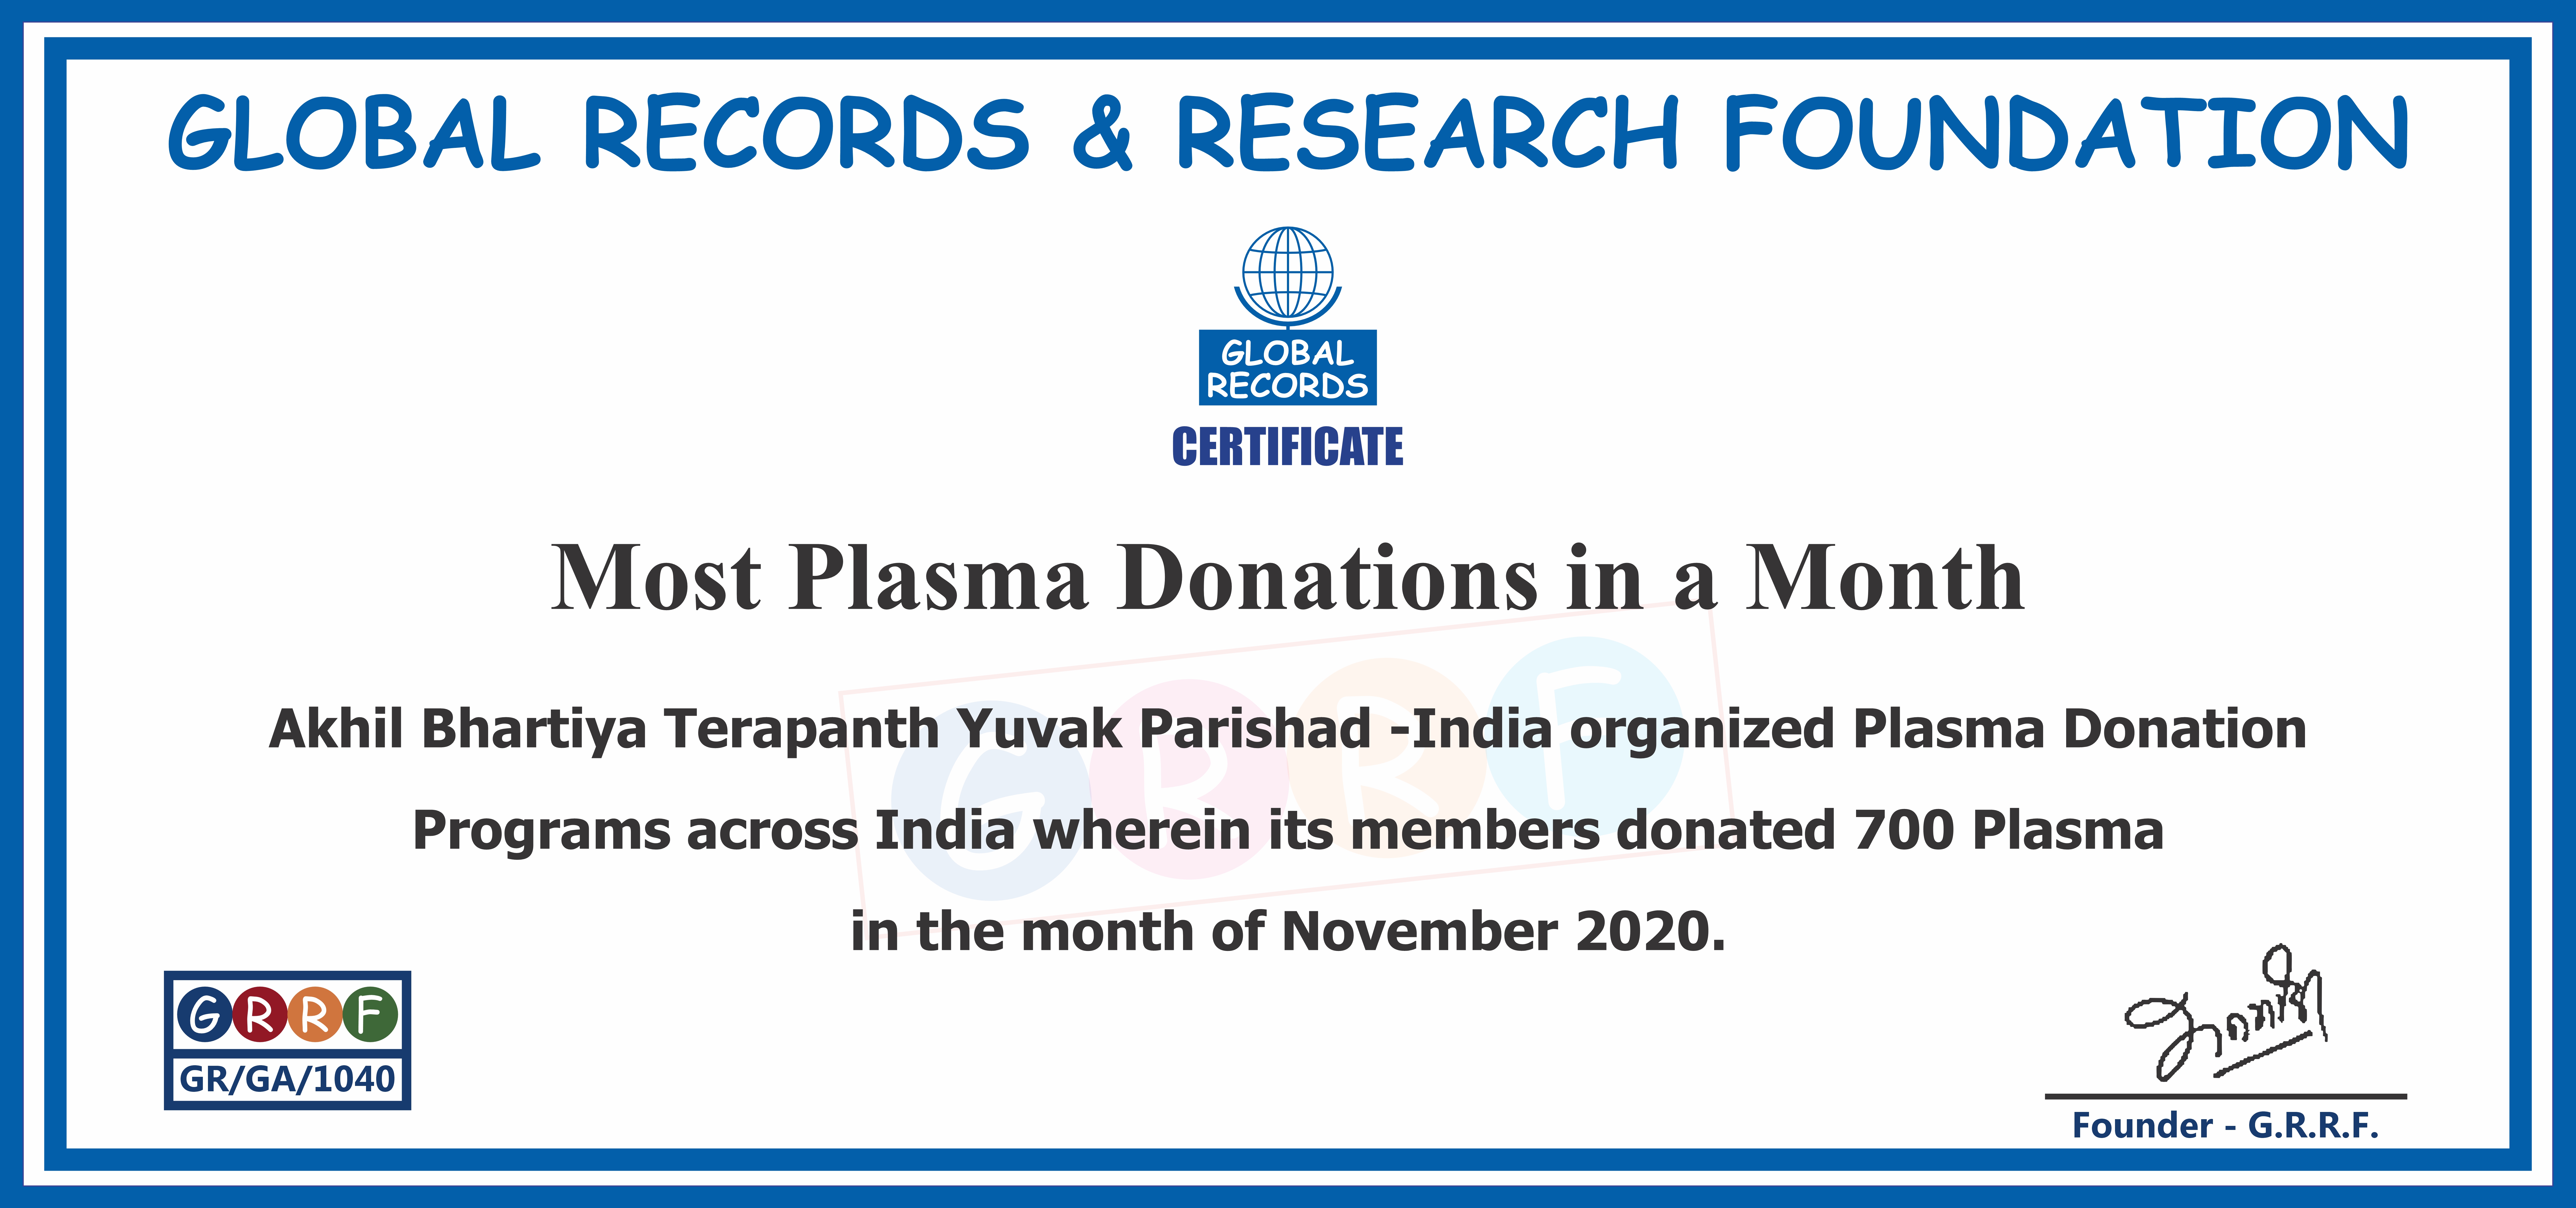 Global Records for Plasma Donation in a Month